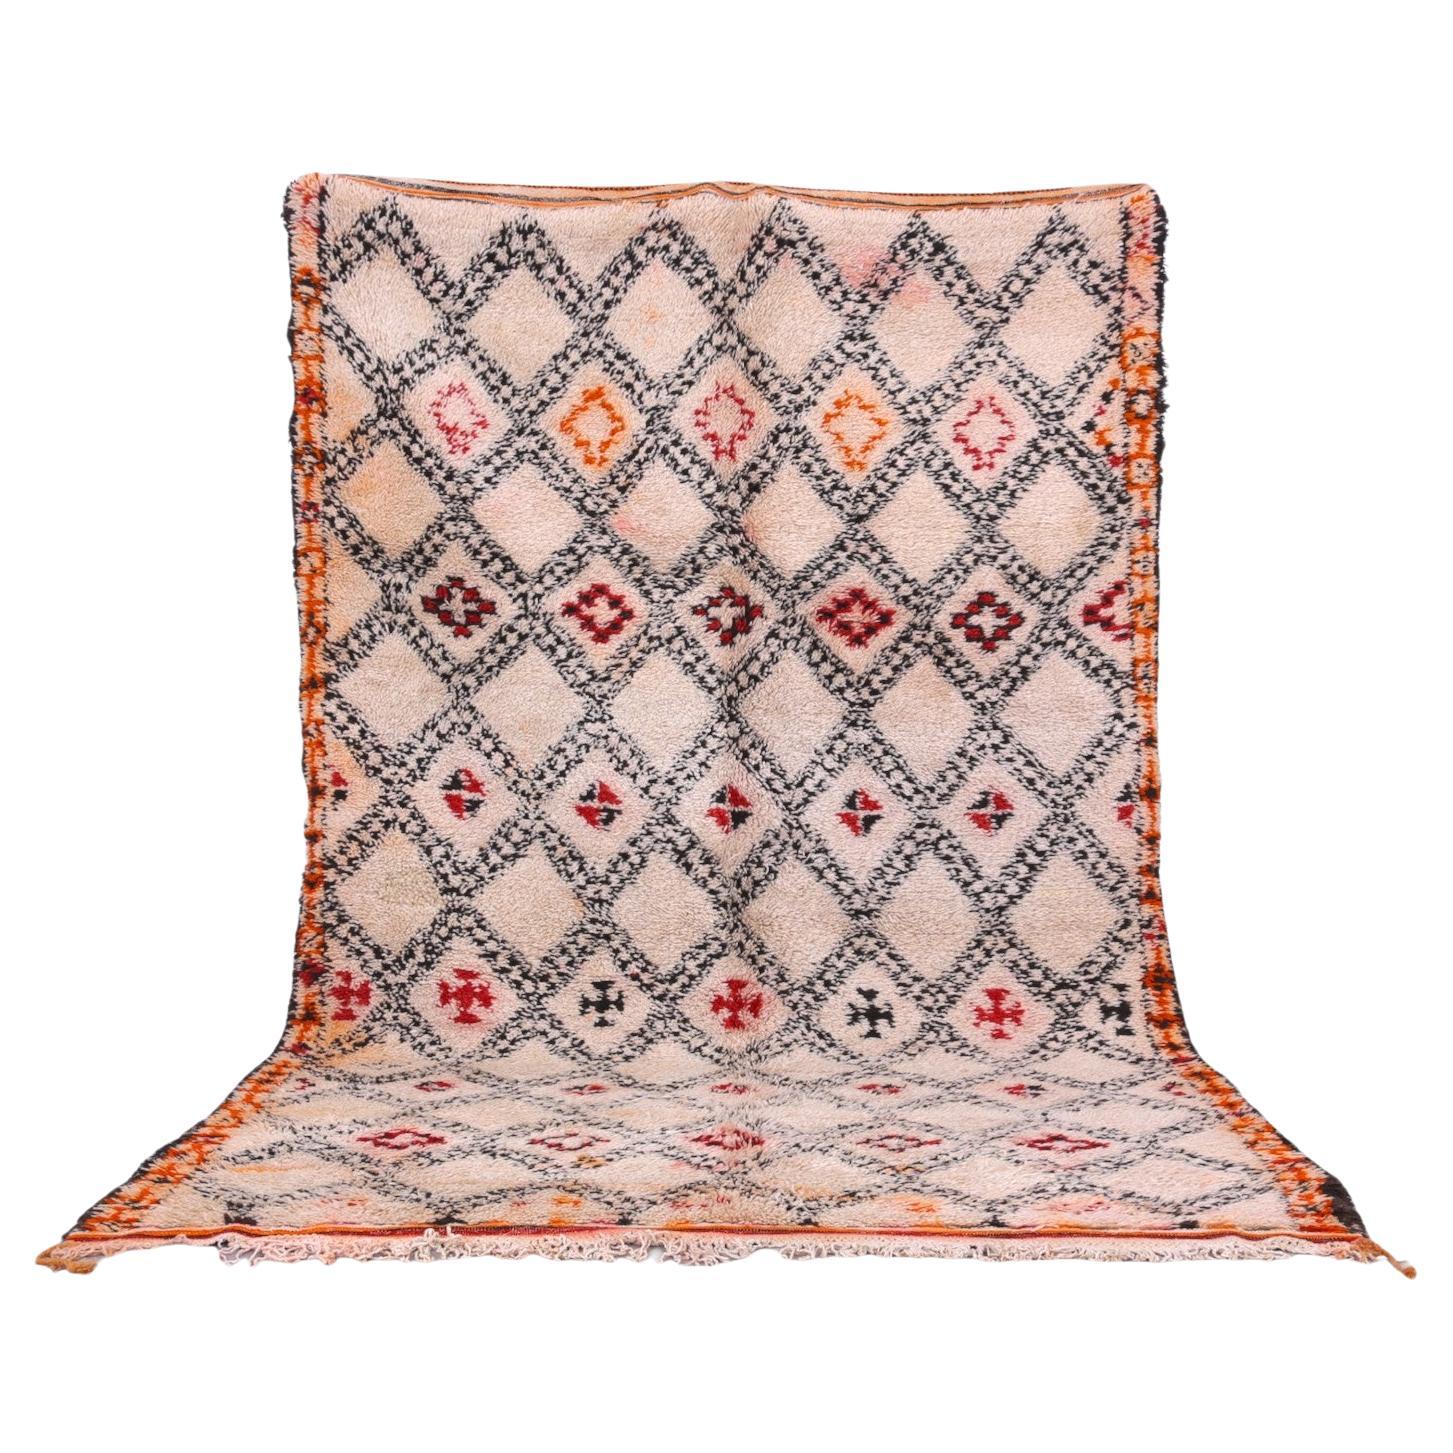 Vintage Beni Ourain Moroccan Rug, Mid-Century Modern Style